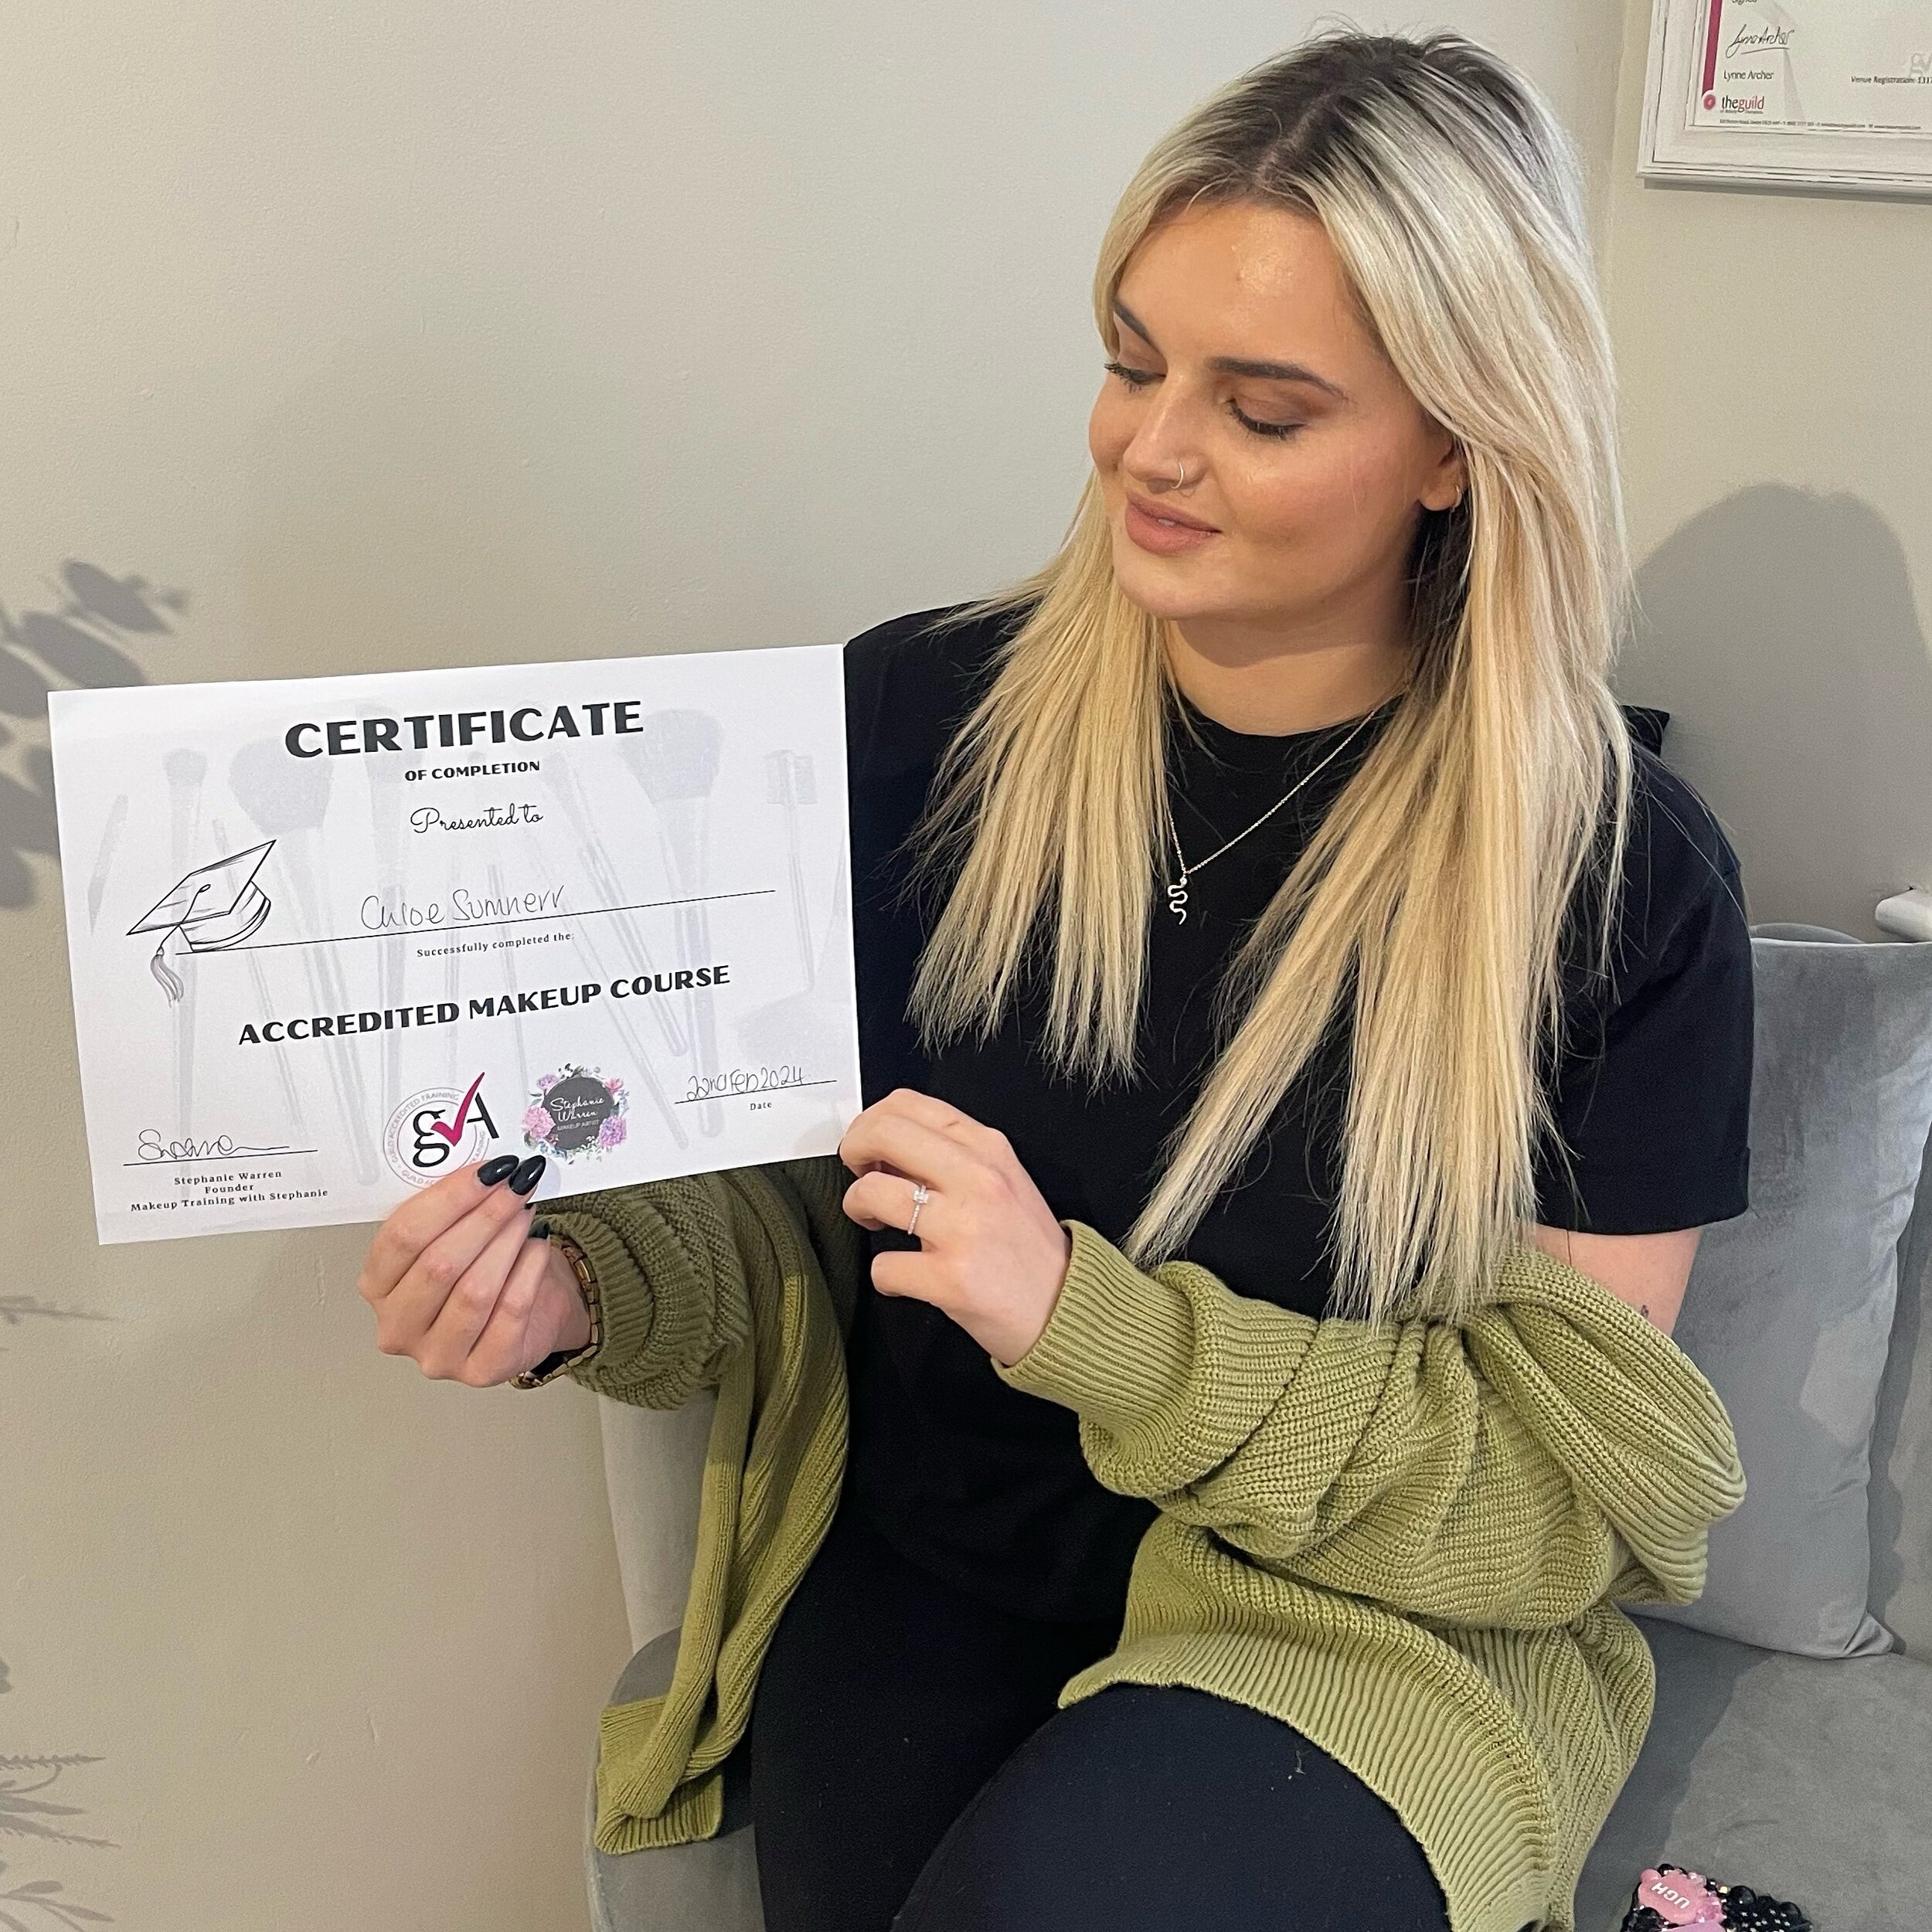 ✨ Accredited Makeup Course ✨ 

A massive congratulations to Chloe who completed her accredited makeup course with me - she did so well! 💜✨👏

MUA: @mua_chloerebecca

#makeupcourse #makeuptraining #onetoonemakeuptraining #onetoonemakeuplesson #makeup